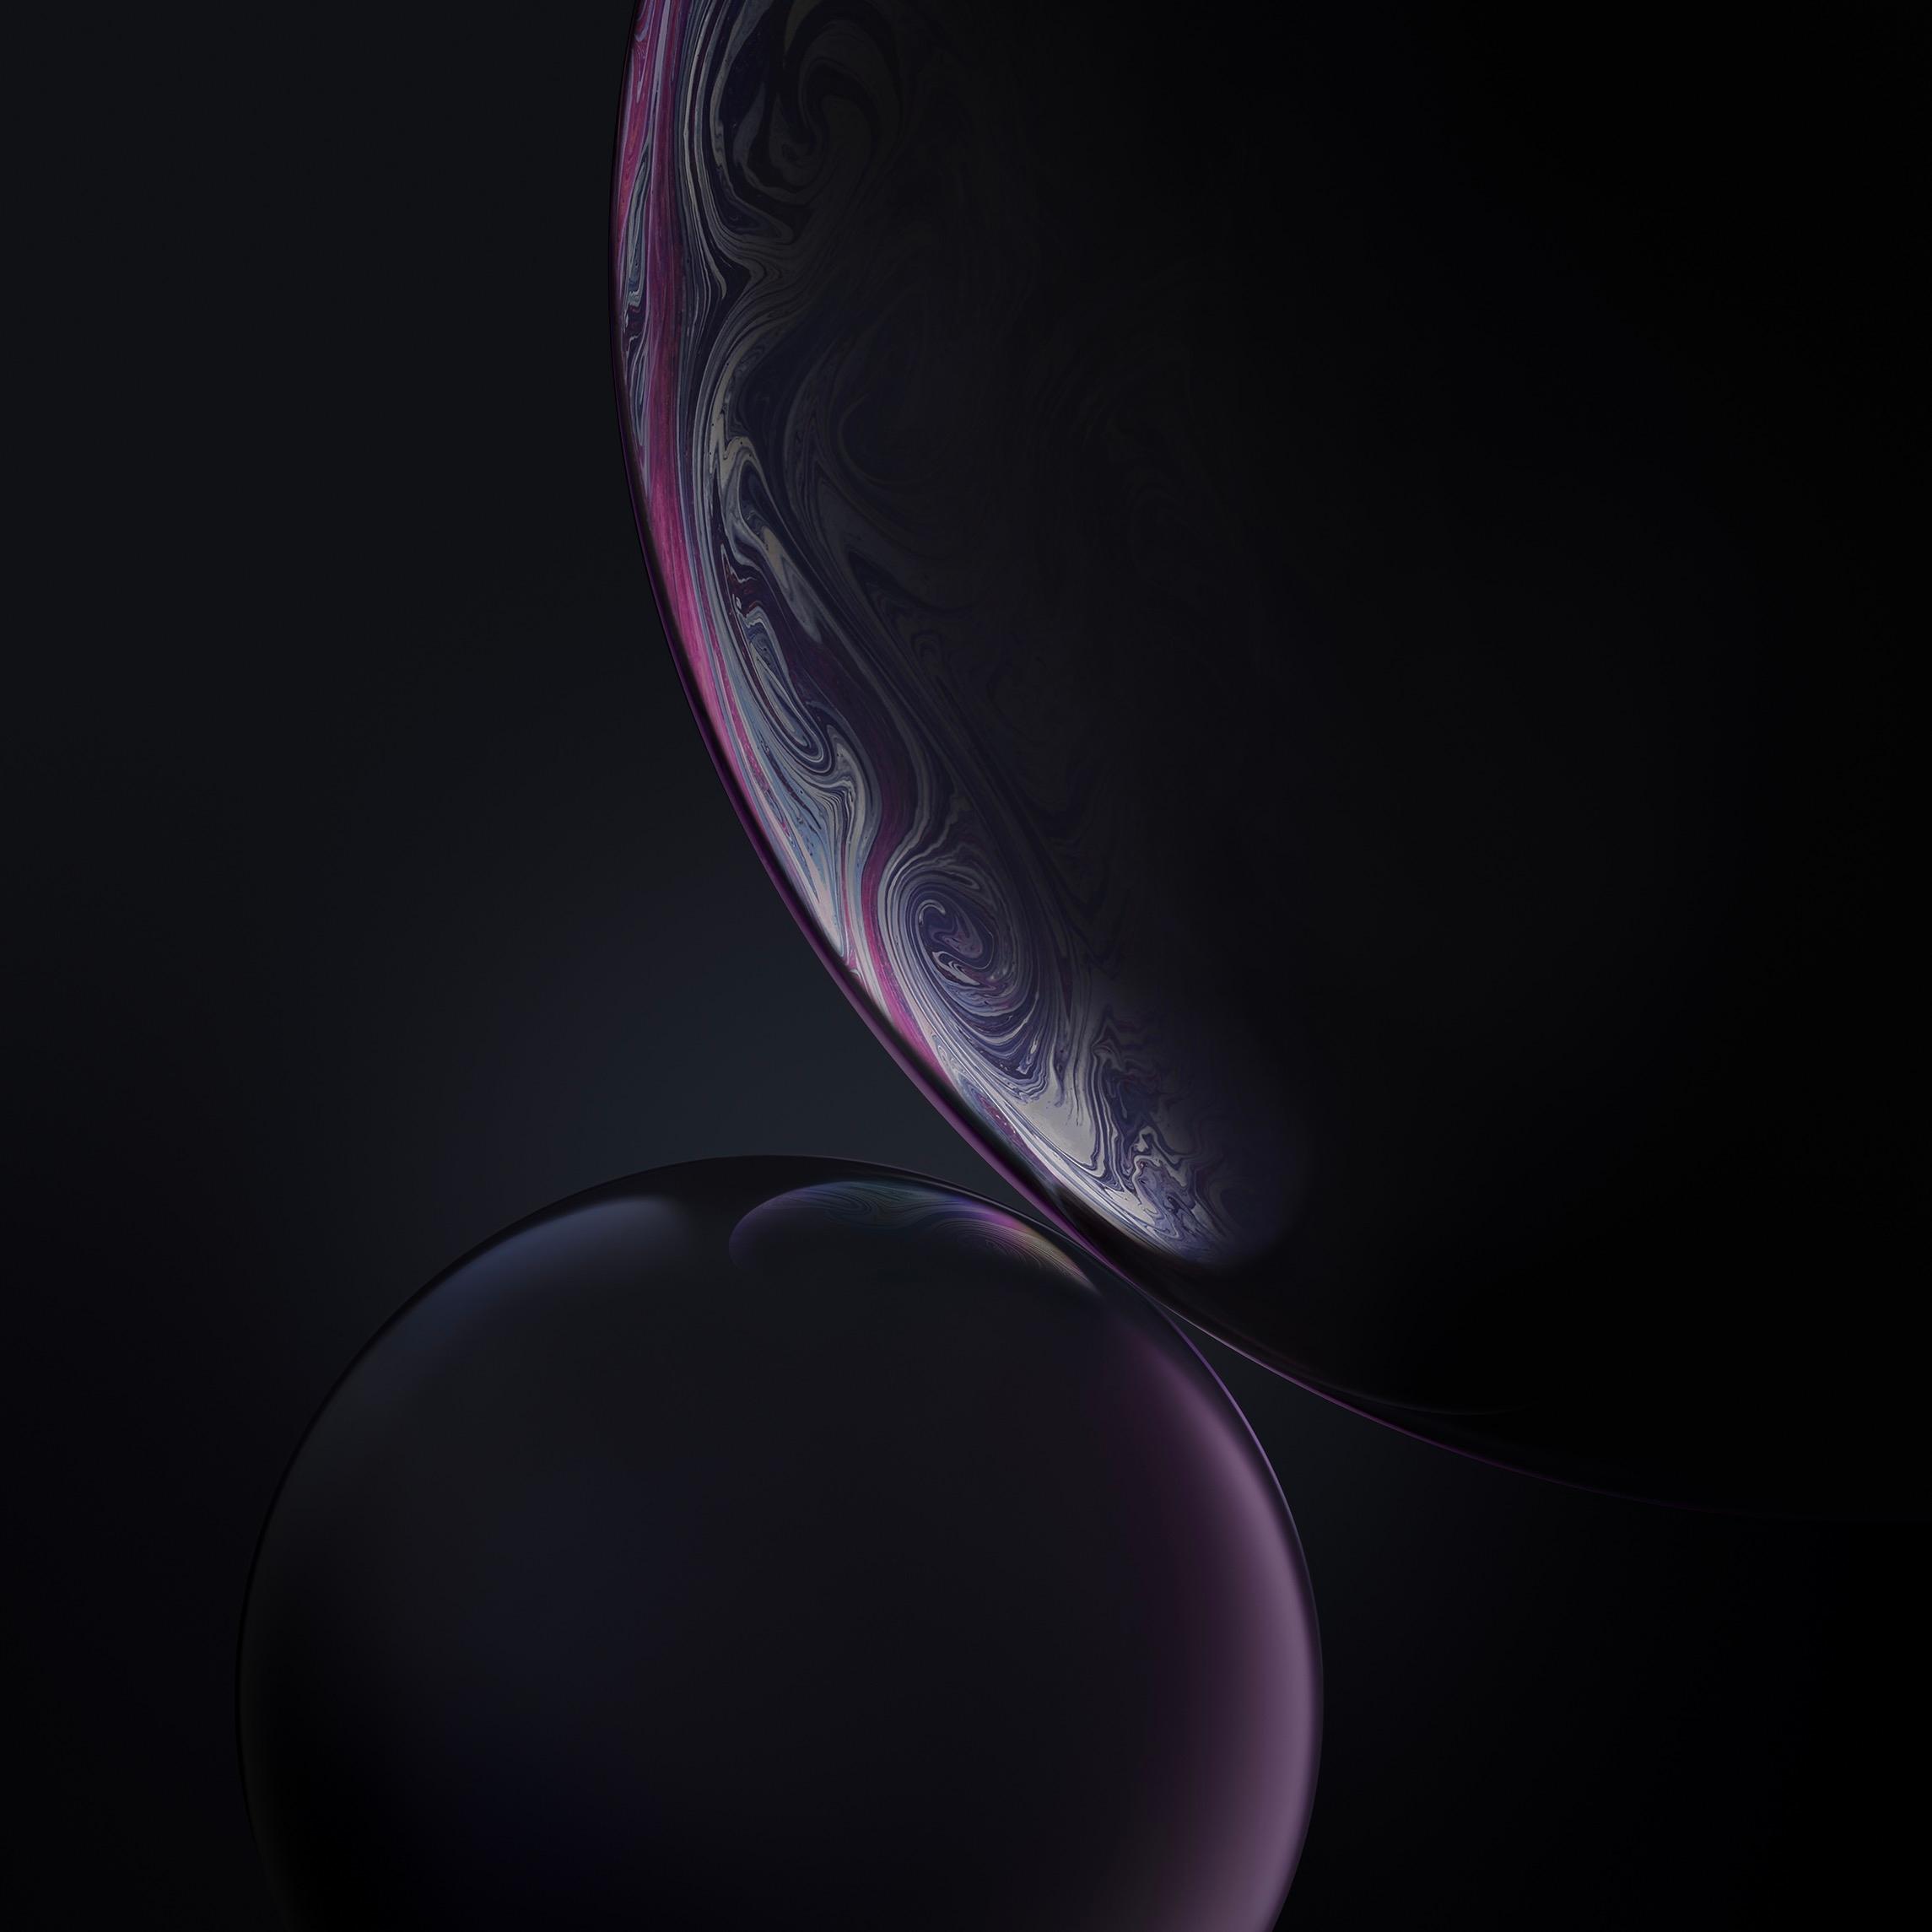 Download The All New iPhone XR 'Bubble' Wallpaper Here